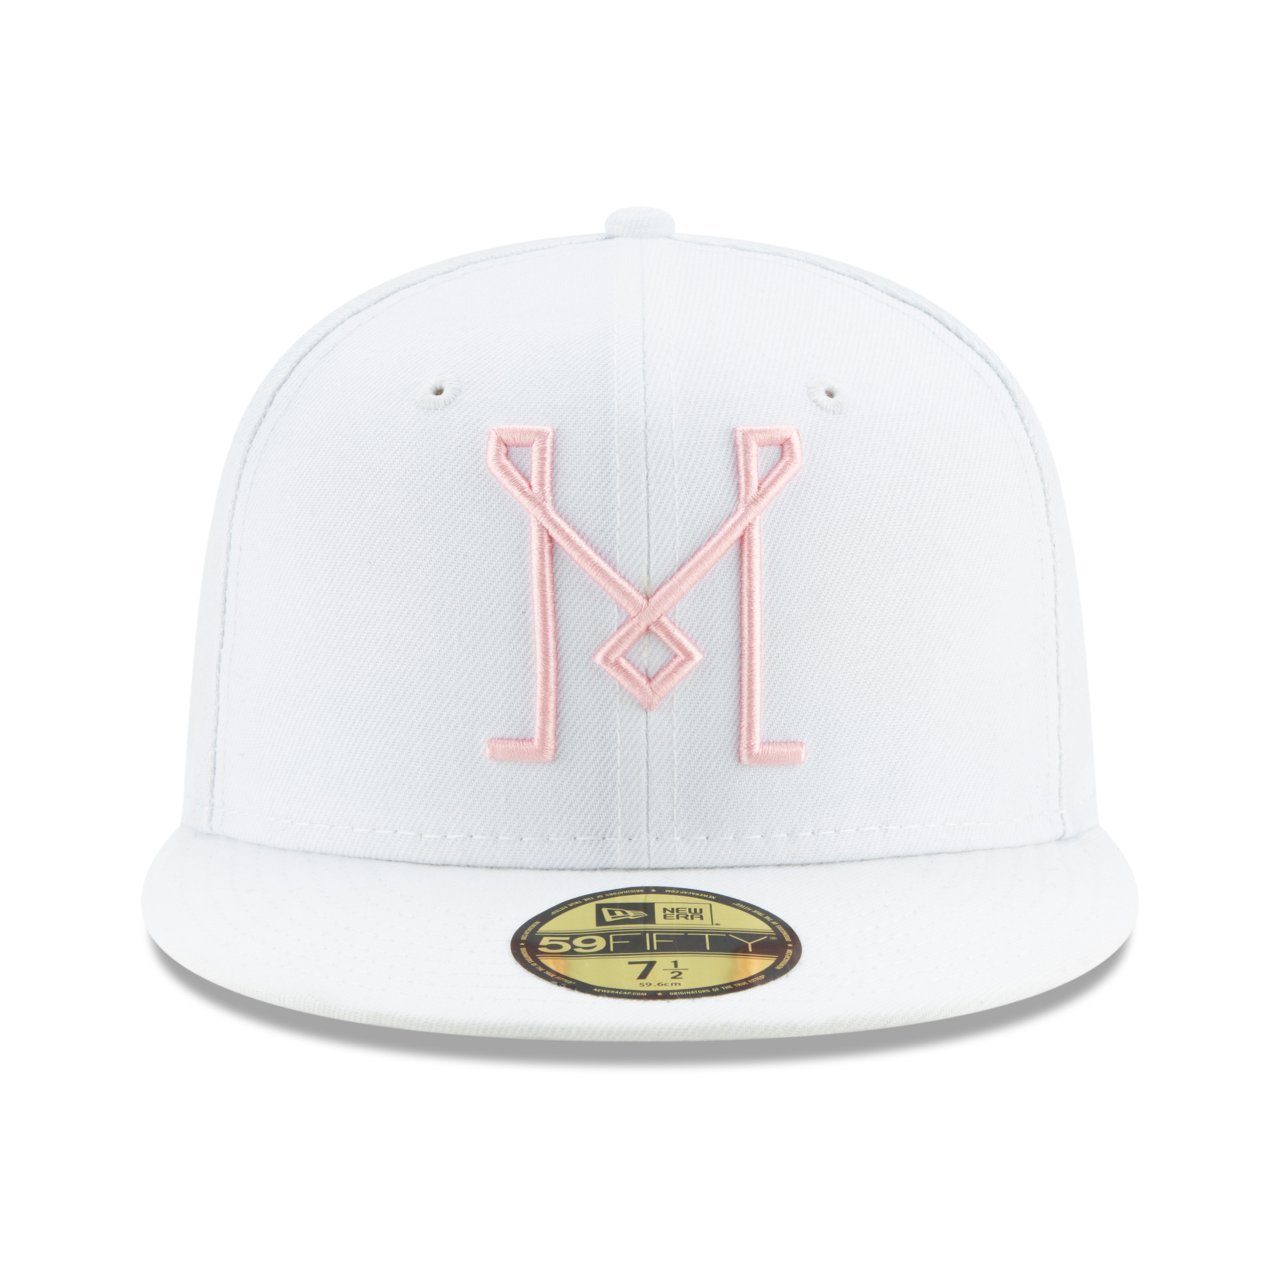 Fitted Era MLS 59Fifty Miami Cap Inter New